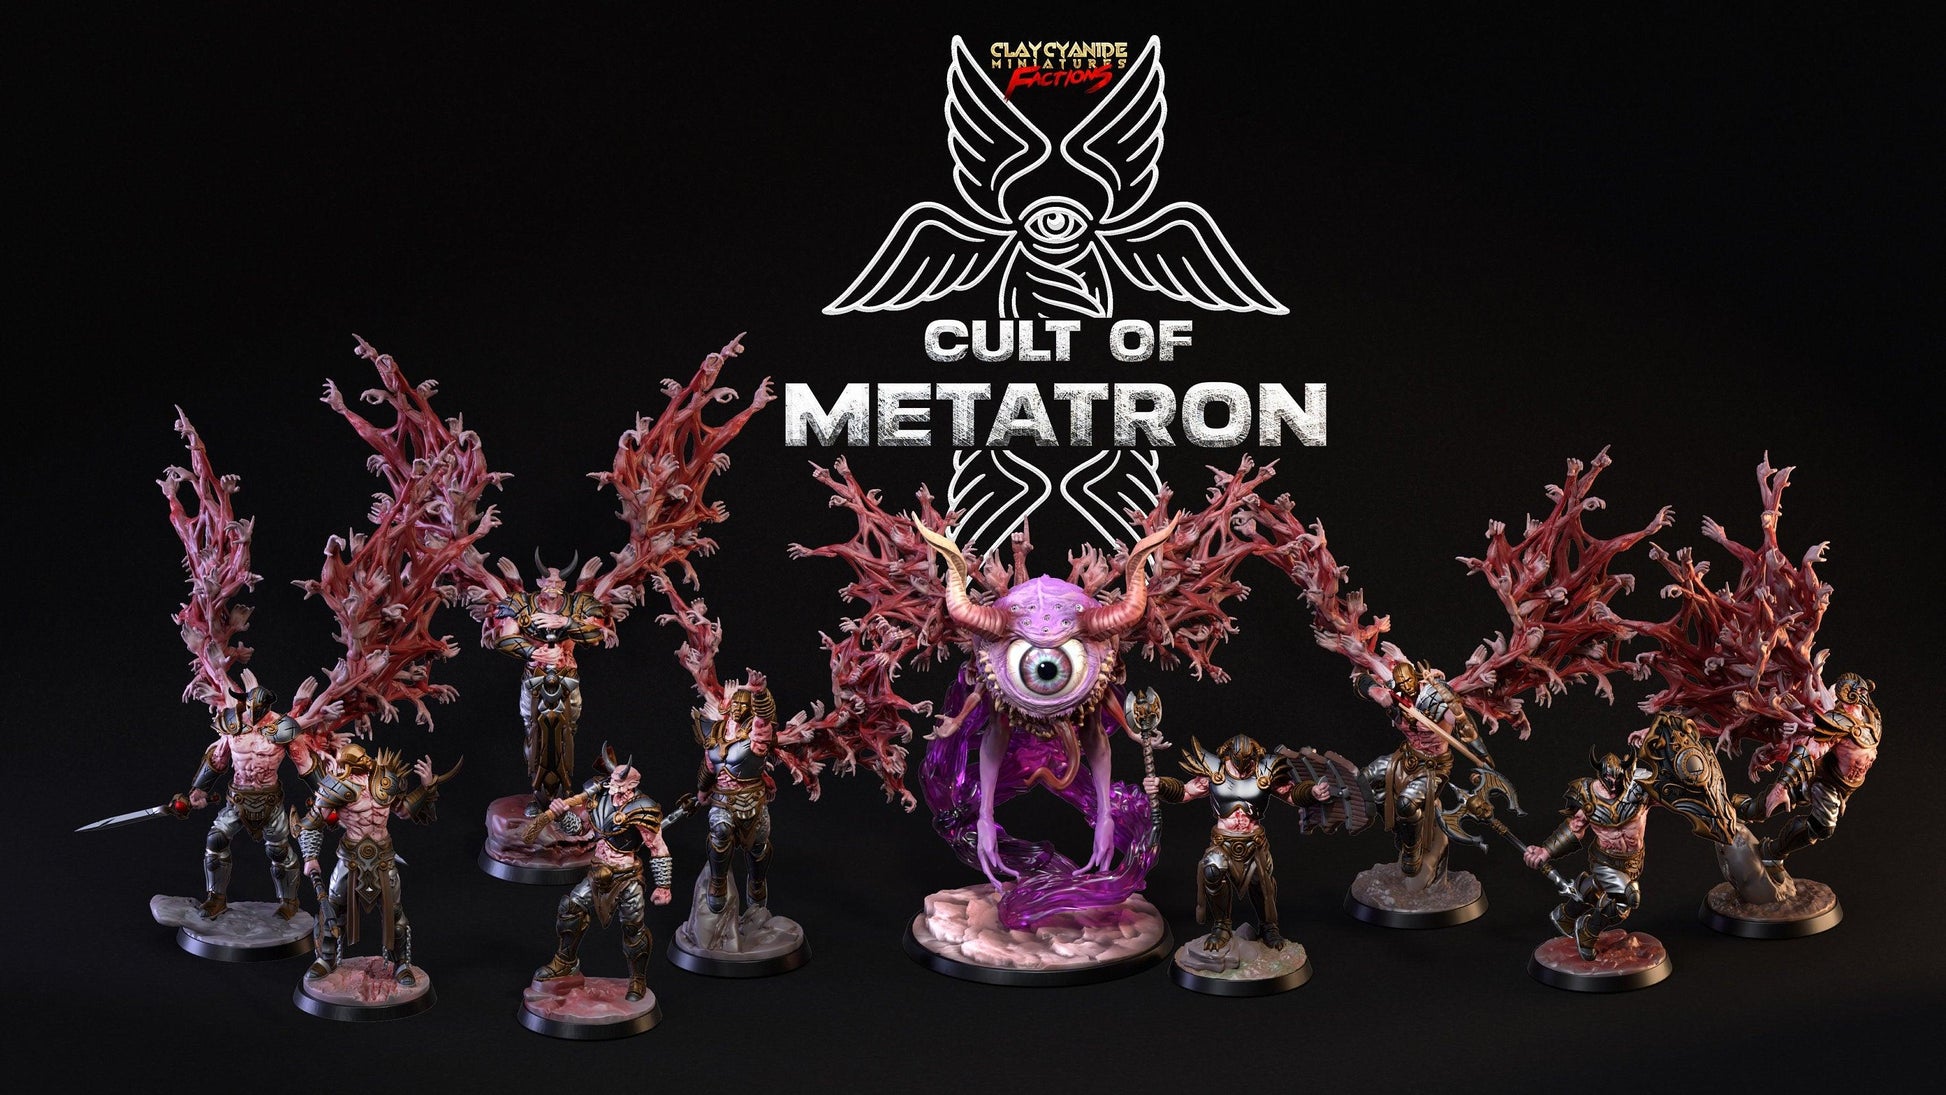 Dahram miniature | Clay Cyanide | Cult of Metatron | Tabletop Gaming | DnD Miniature | Dungeons and Dragons | dnd 5e miniatures - Plague Miniatures shop for DnD Miniatures